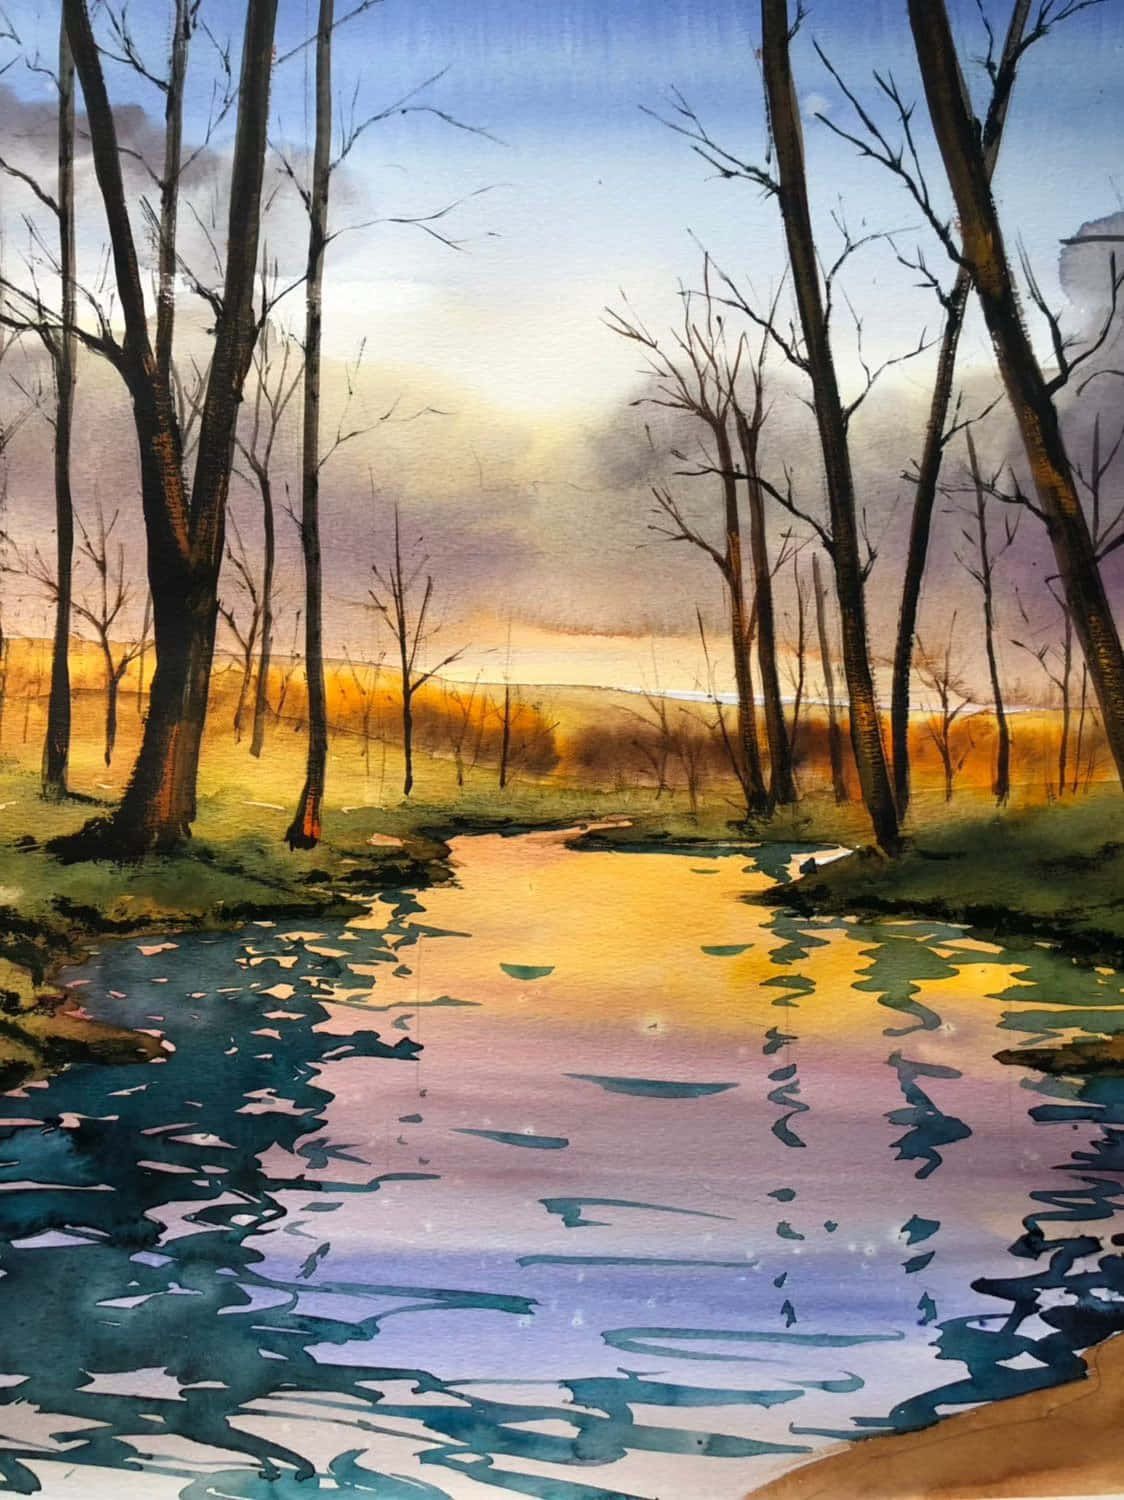 A Watercolor Painting Of A River In The Woods